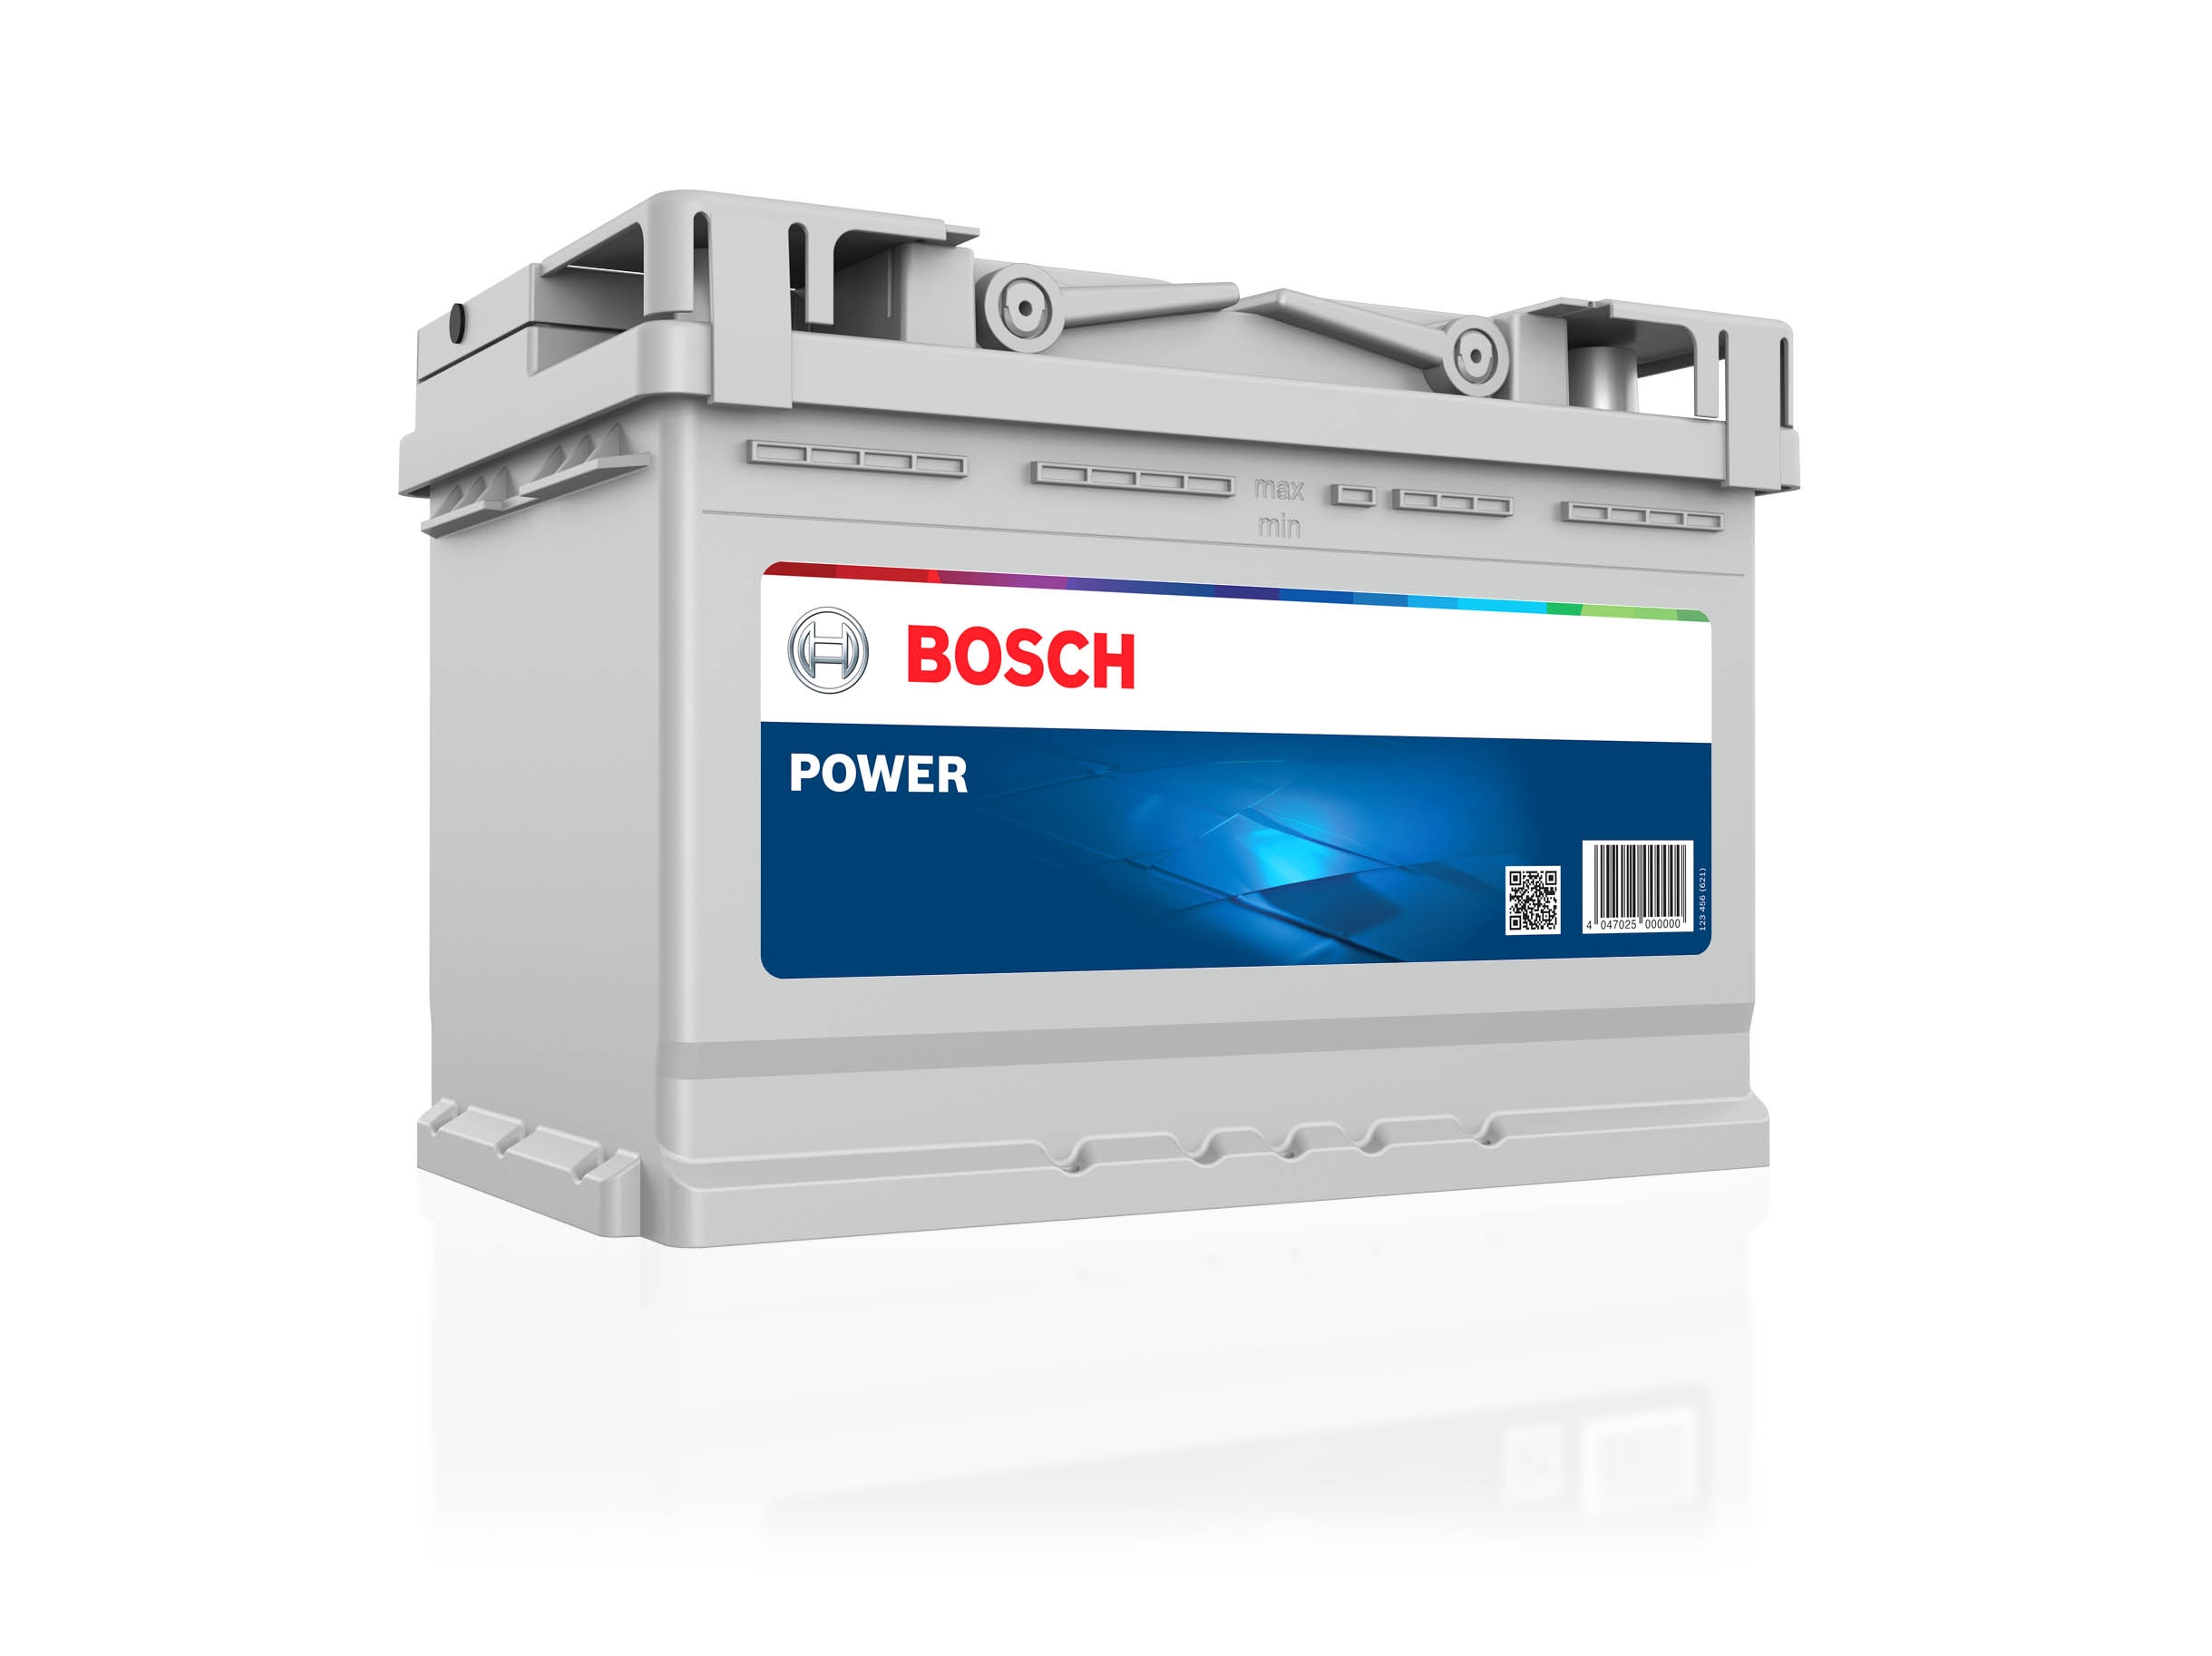 Acumulator auto BOSCH POWER 56Ah/480A Pagina 2/opel-adam/piese-auto-ford-mustang - Piese auto Chevrolet